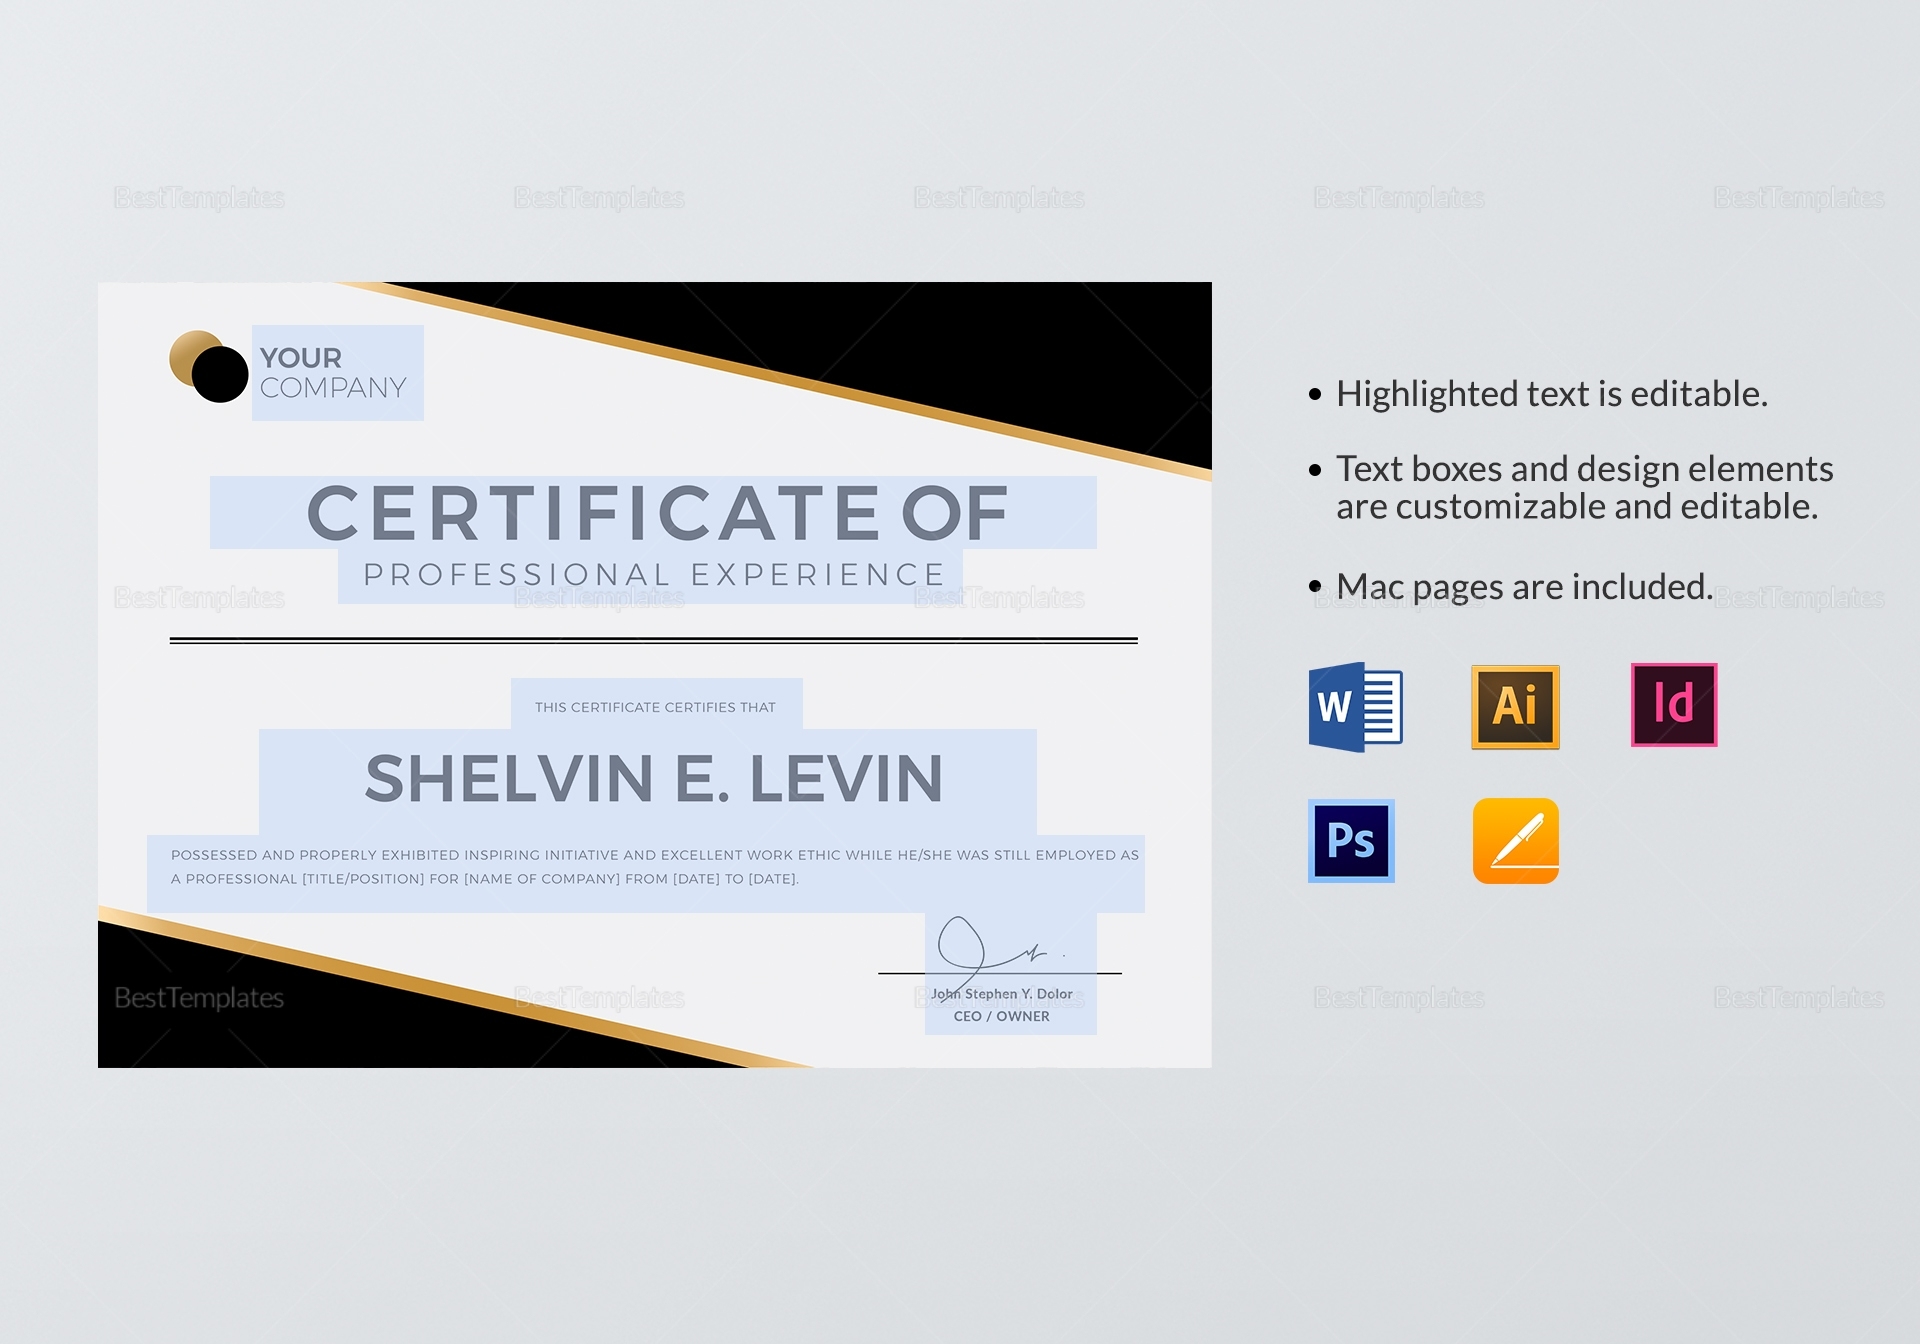 Professional Experience Certificate Template In Psd, Word, Illustrator with regard to Professional Certificate Templates For Word